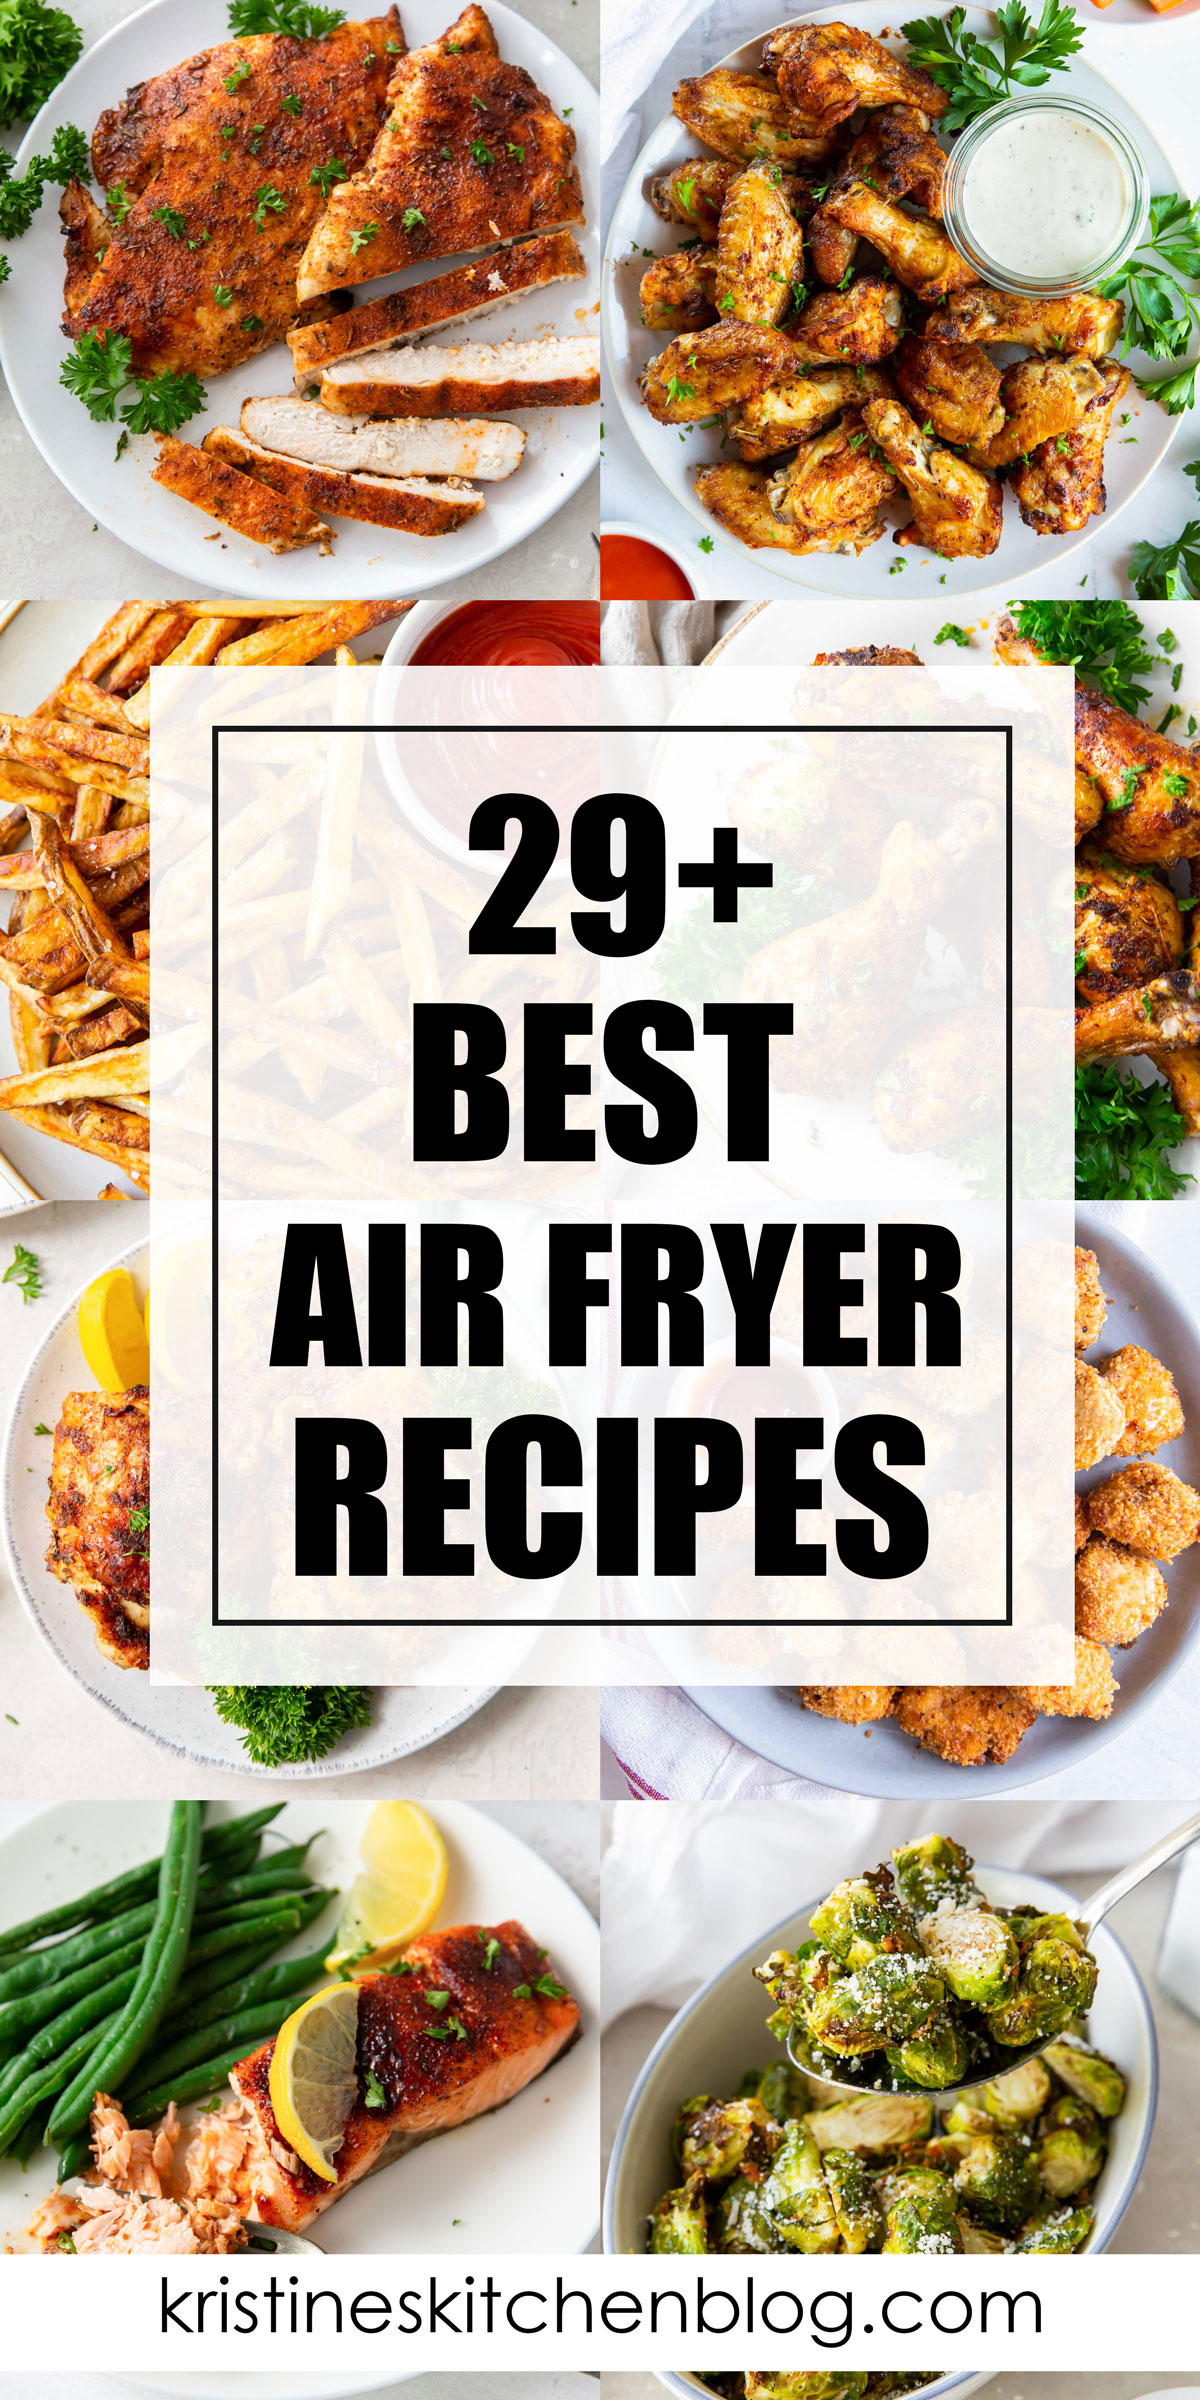 Collage image of 8 air fryer recipes with text overlay.